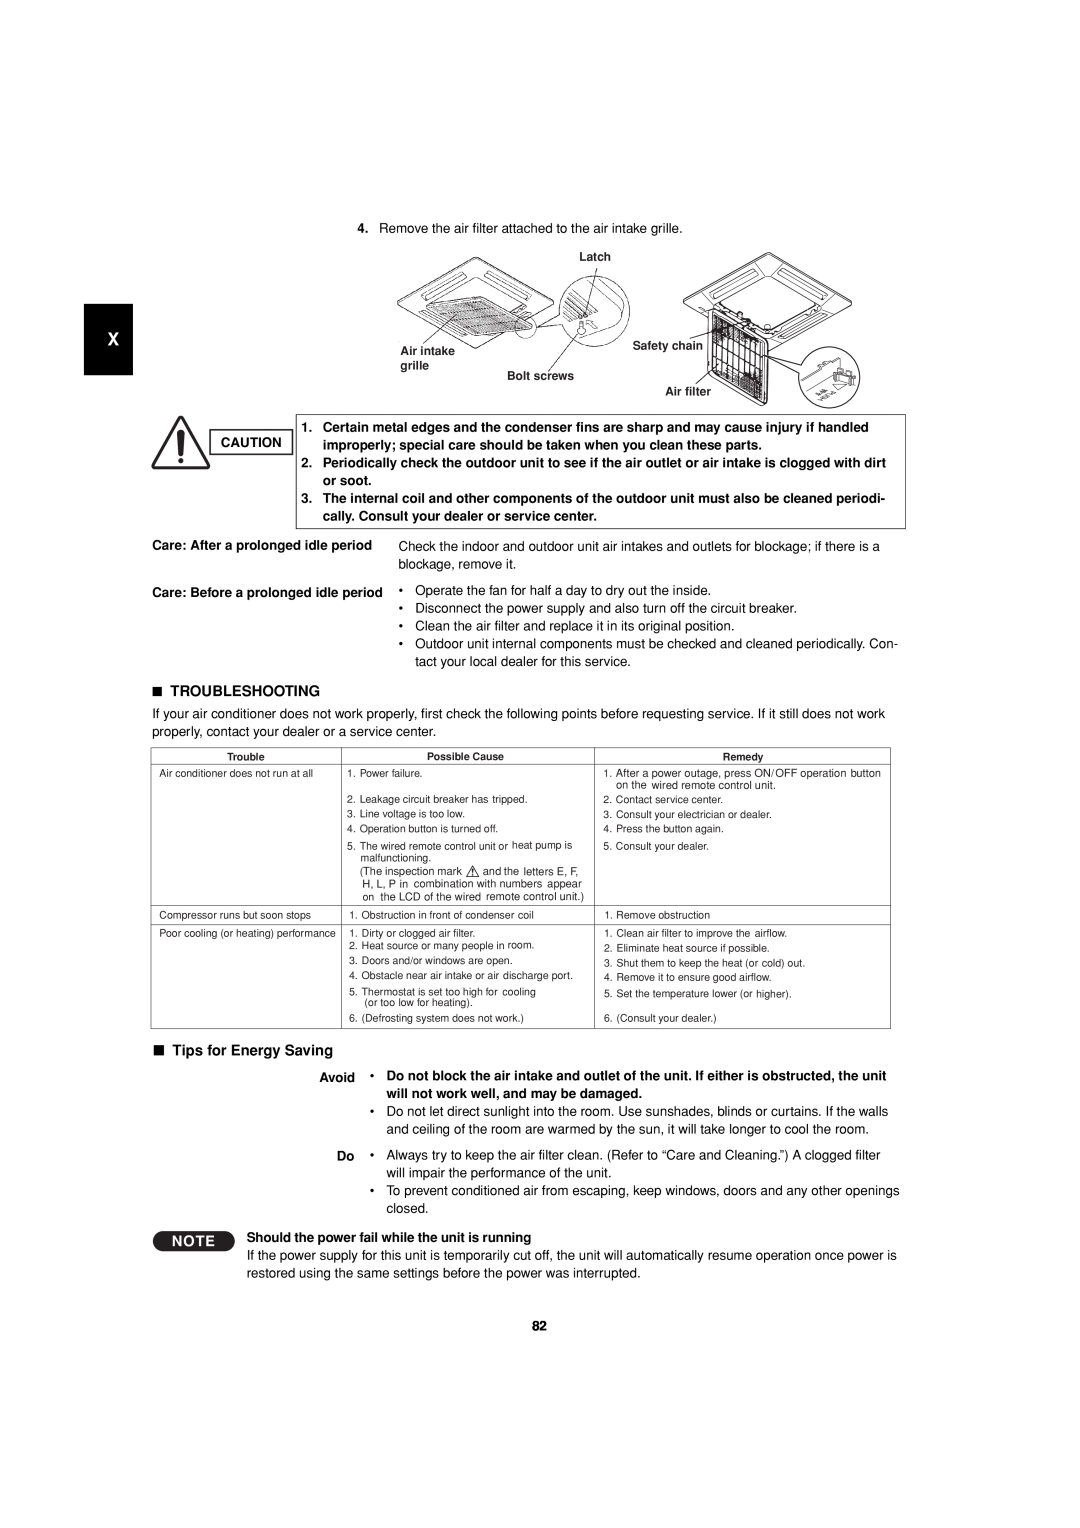 Sanyo 85464359981002 installation instructions Troubleshooting, Tips for Energy Saving 